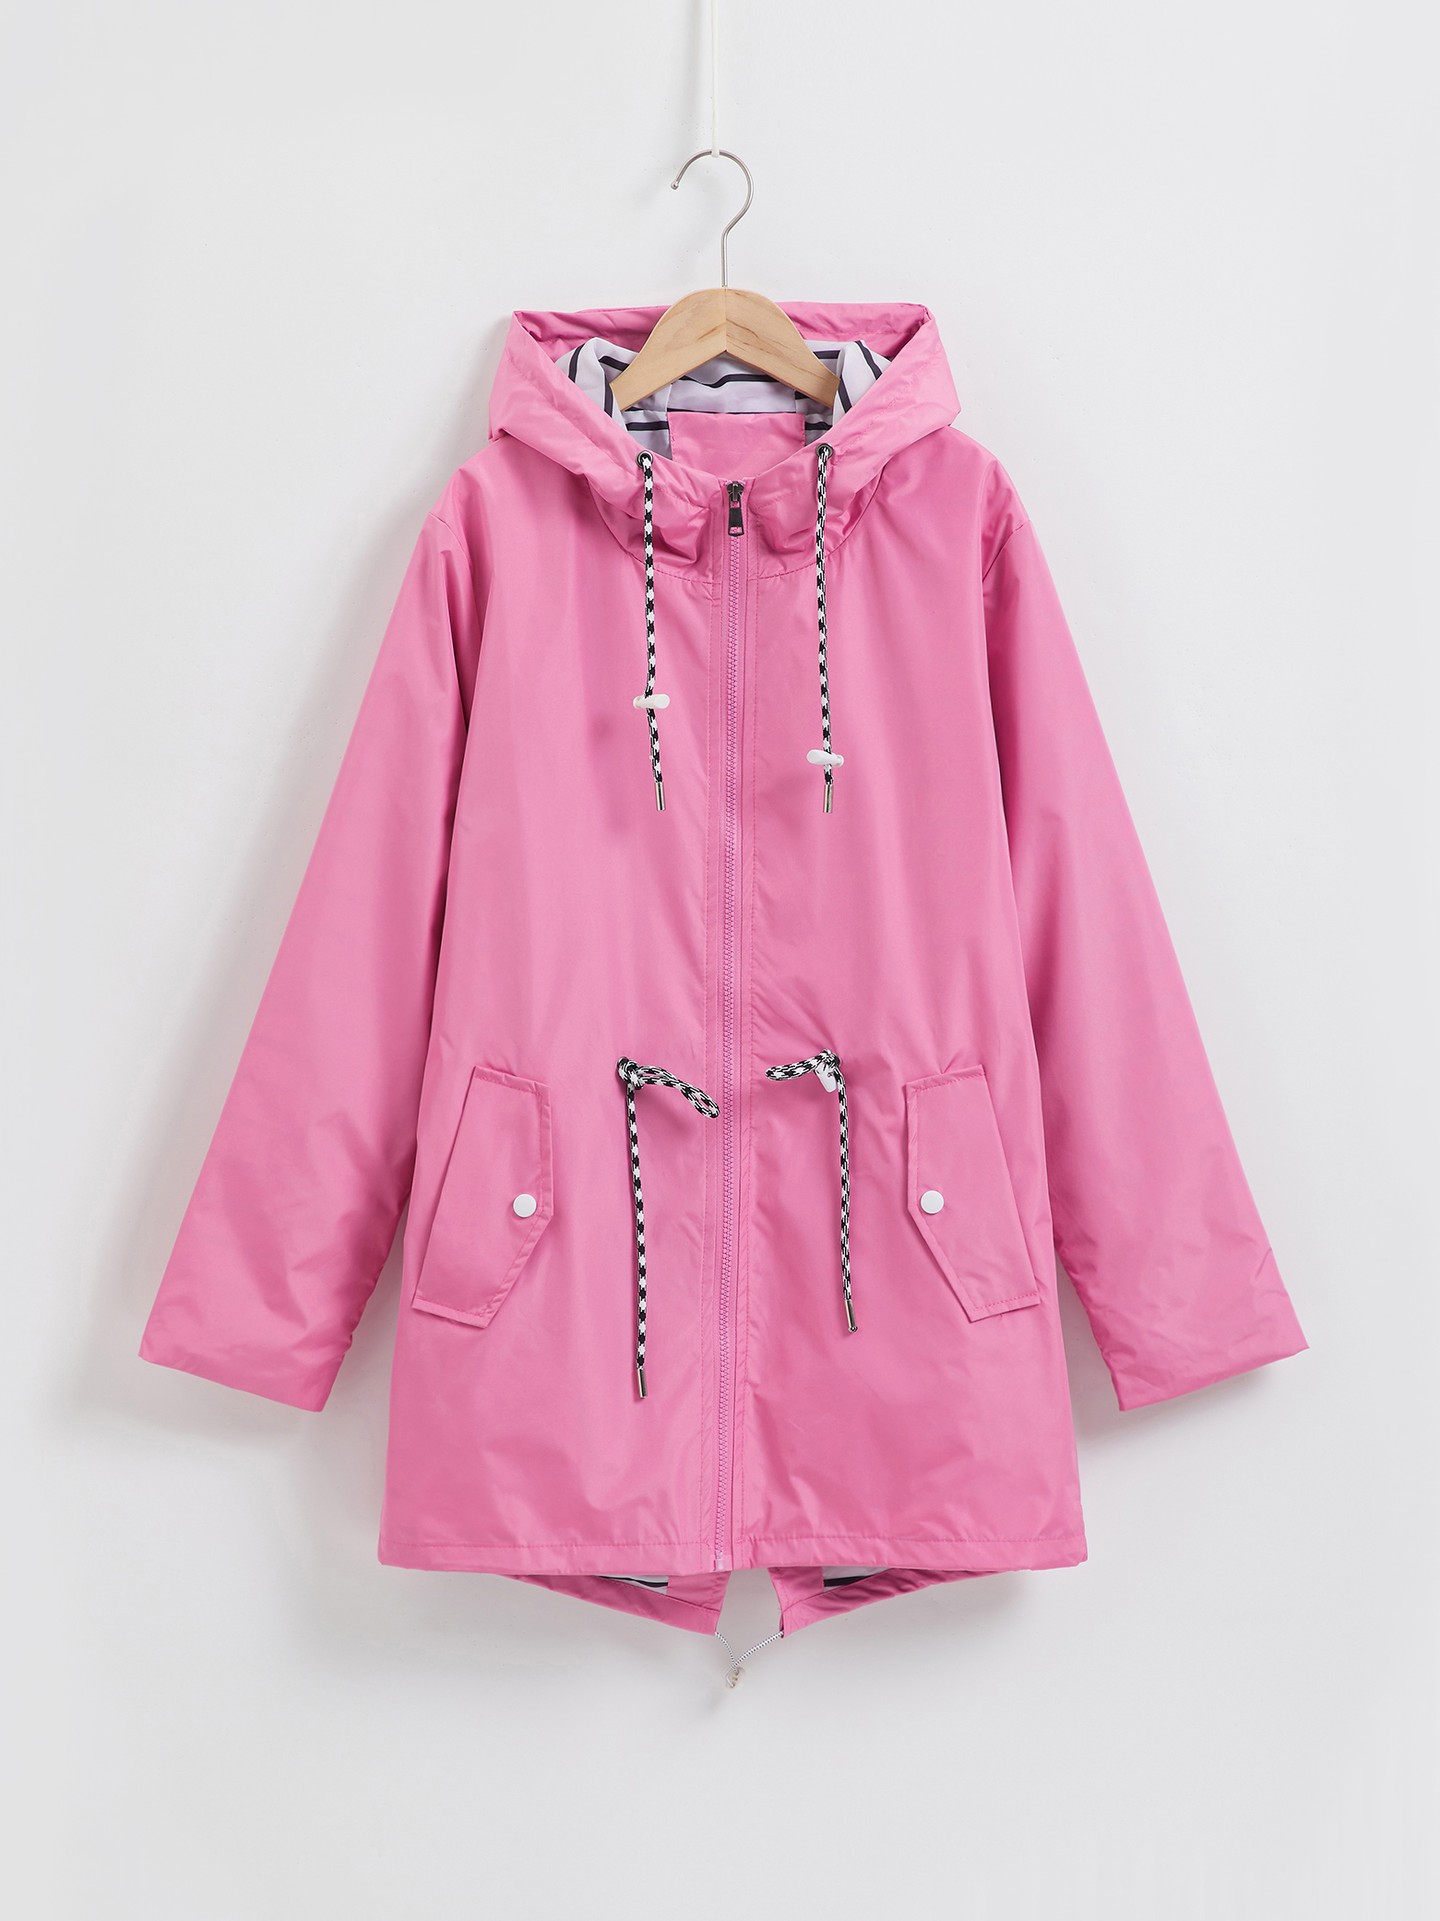 Windbreaker Jacket Adjustable Drawstring Hood Wholesale Manufacturer &  Exporters Textile & Fashion Leather Clothing Goods with we have provide  customization Brand your own